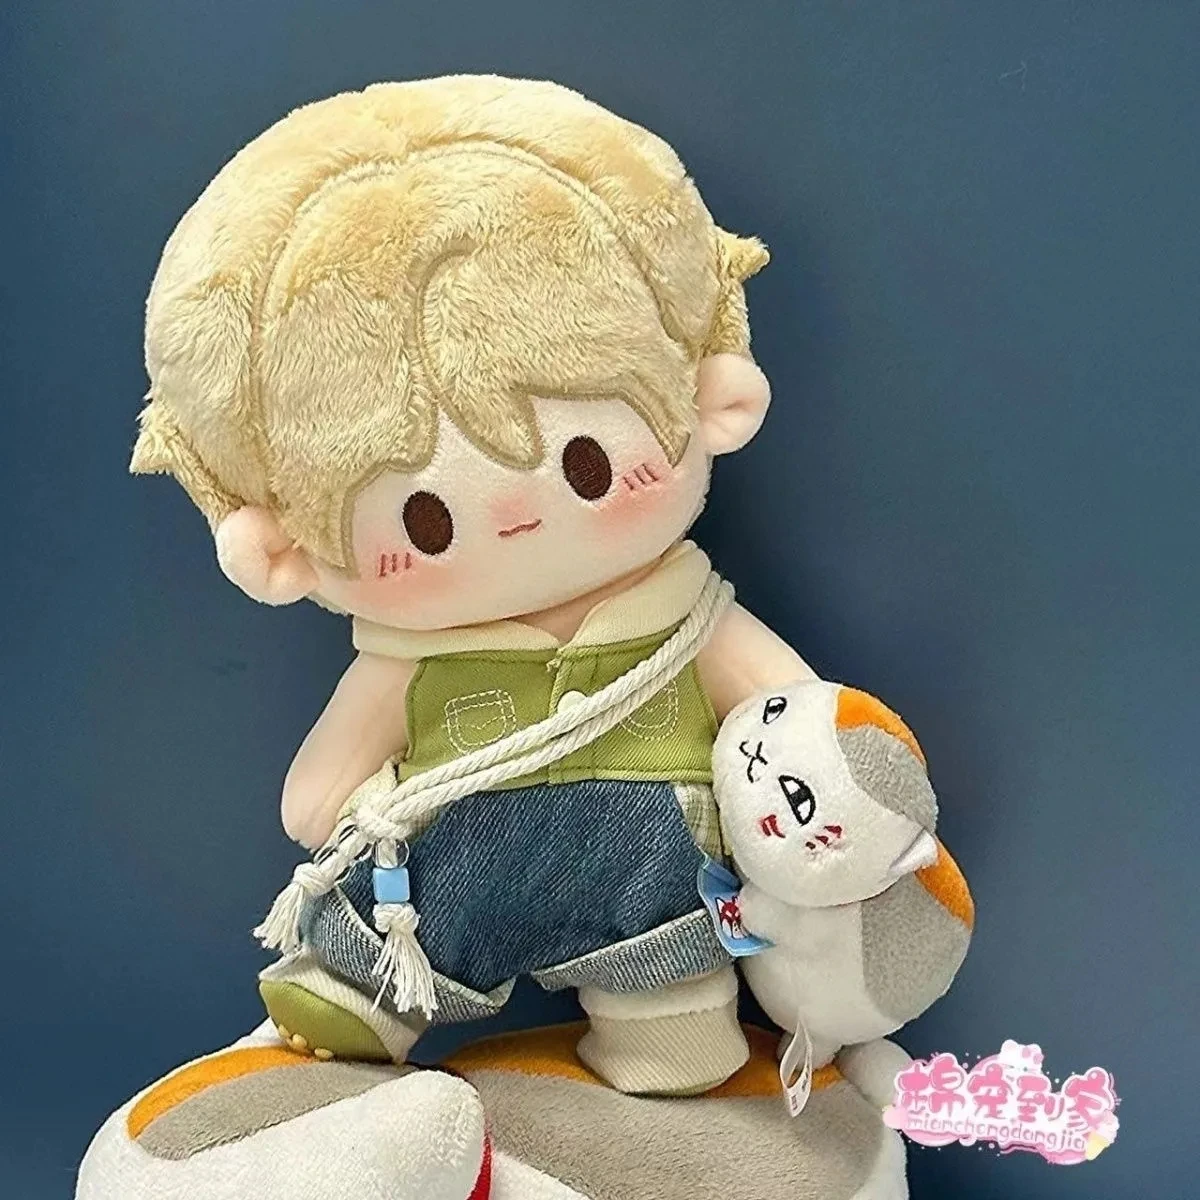 Anime Natsume's Book of Friends Natsume Takashi 20cm Plush Dolls Toy Nude Doll Plushie Cosplay a5837 Kids Gift